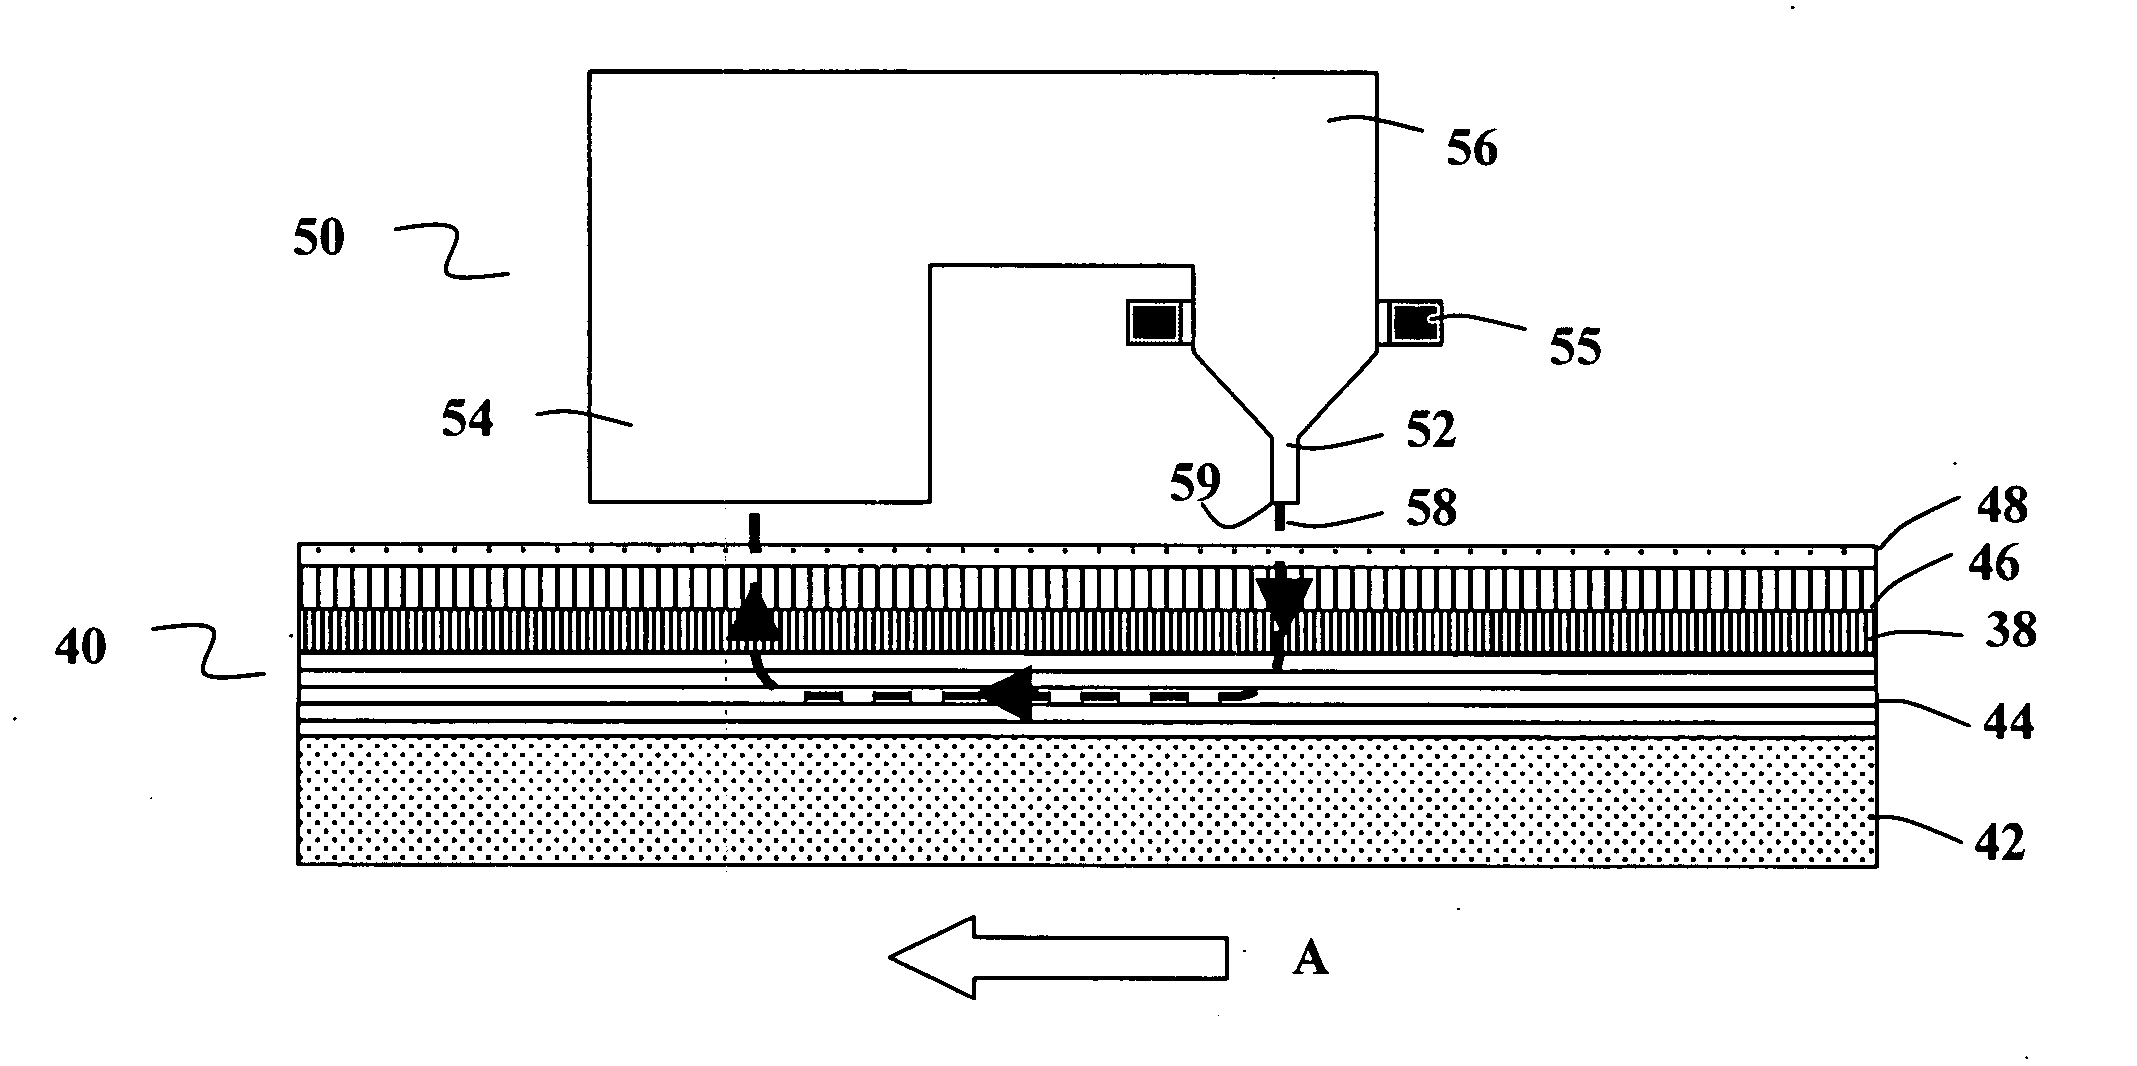 Composite magnetic recording structure having a metamagnetic layer with field induced transition to ferromagnetic state